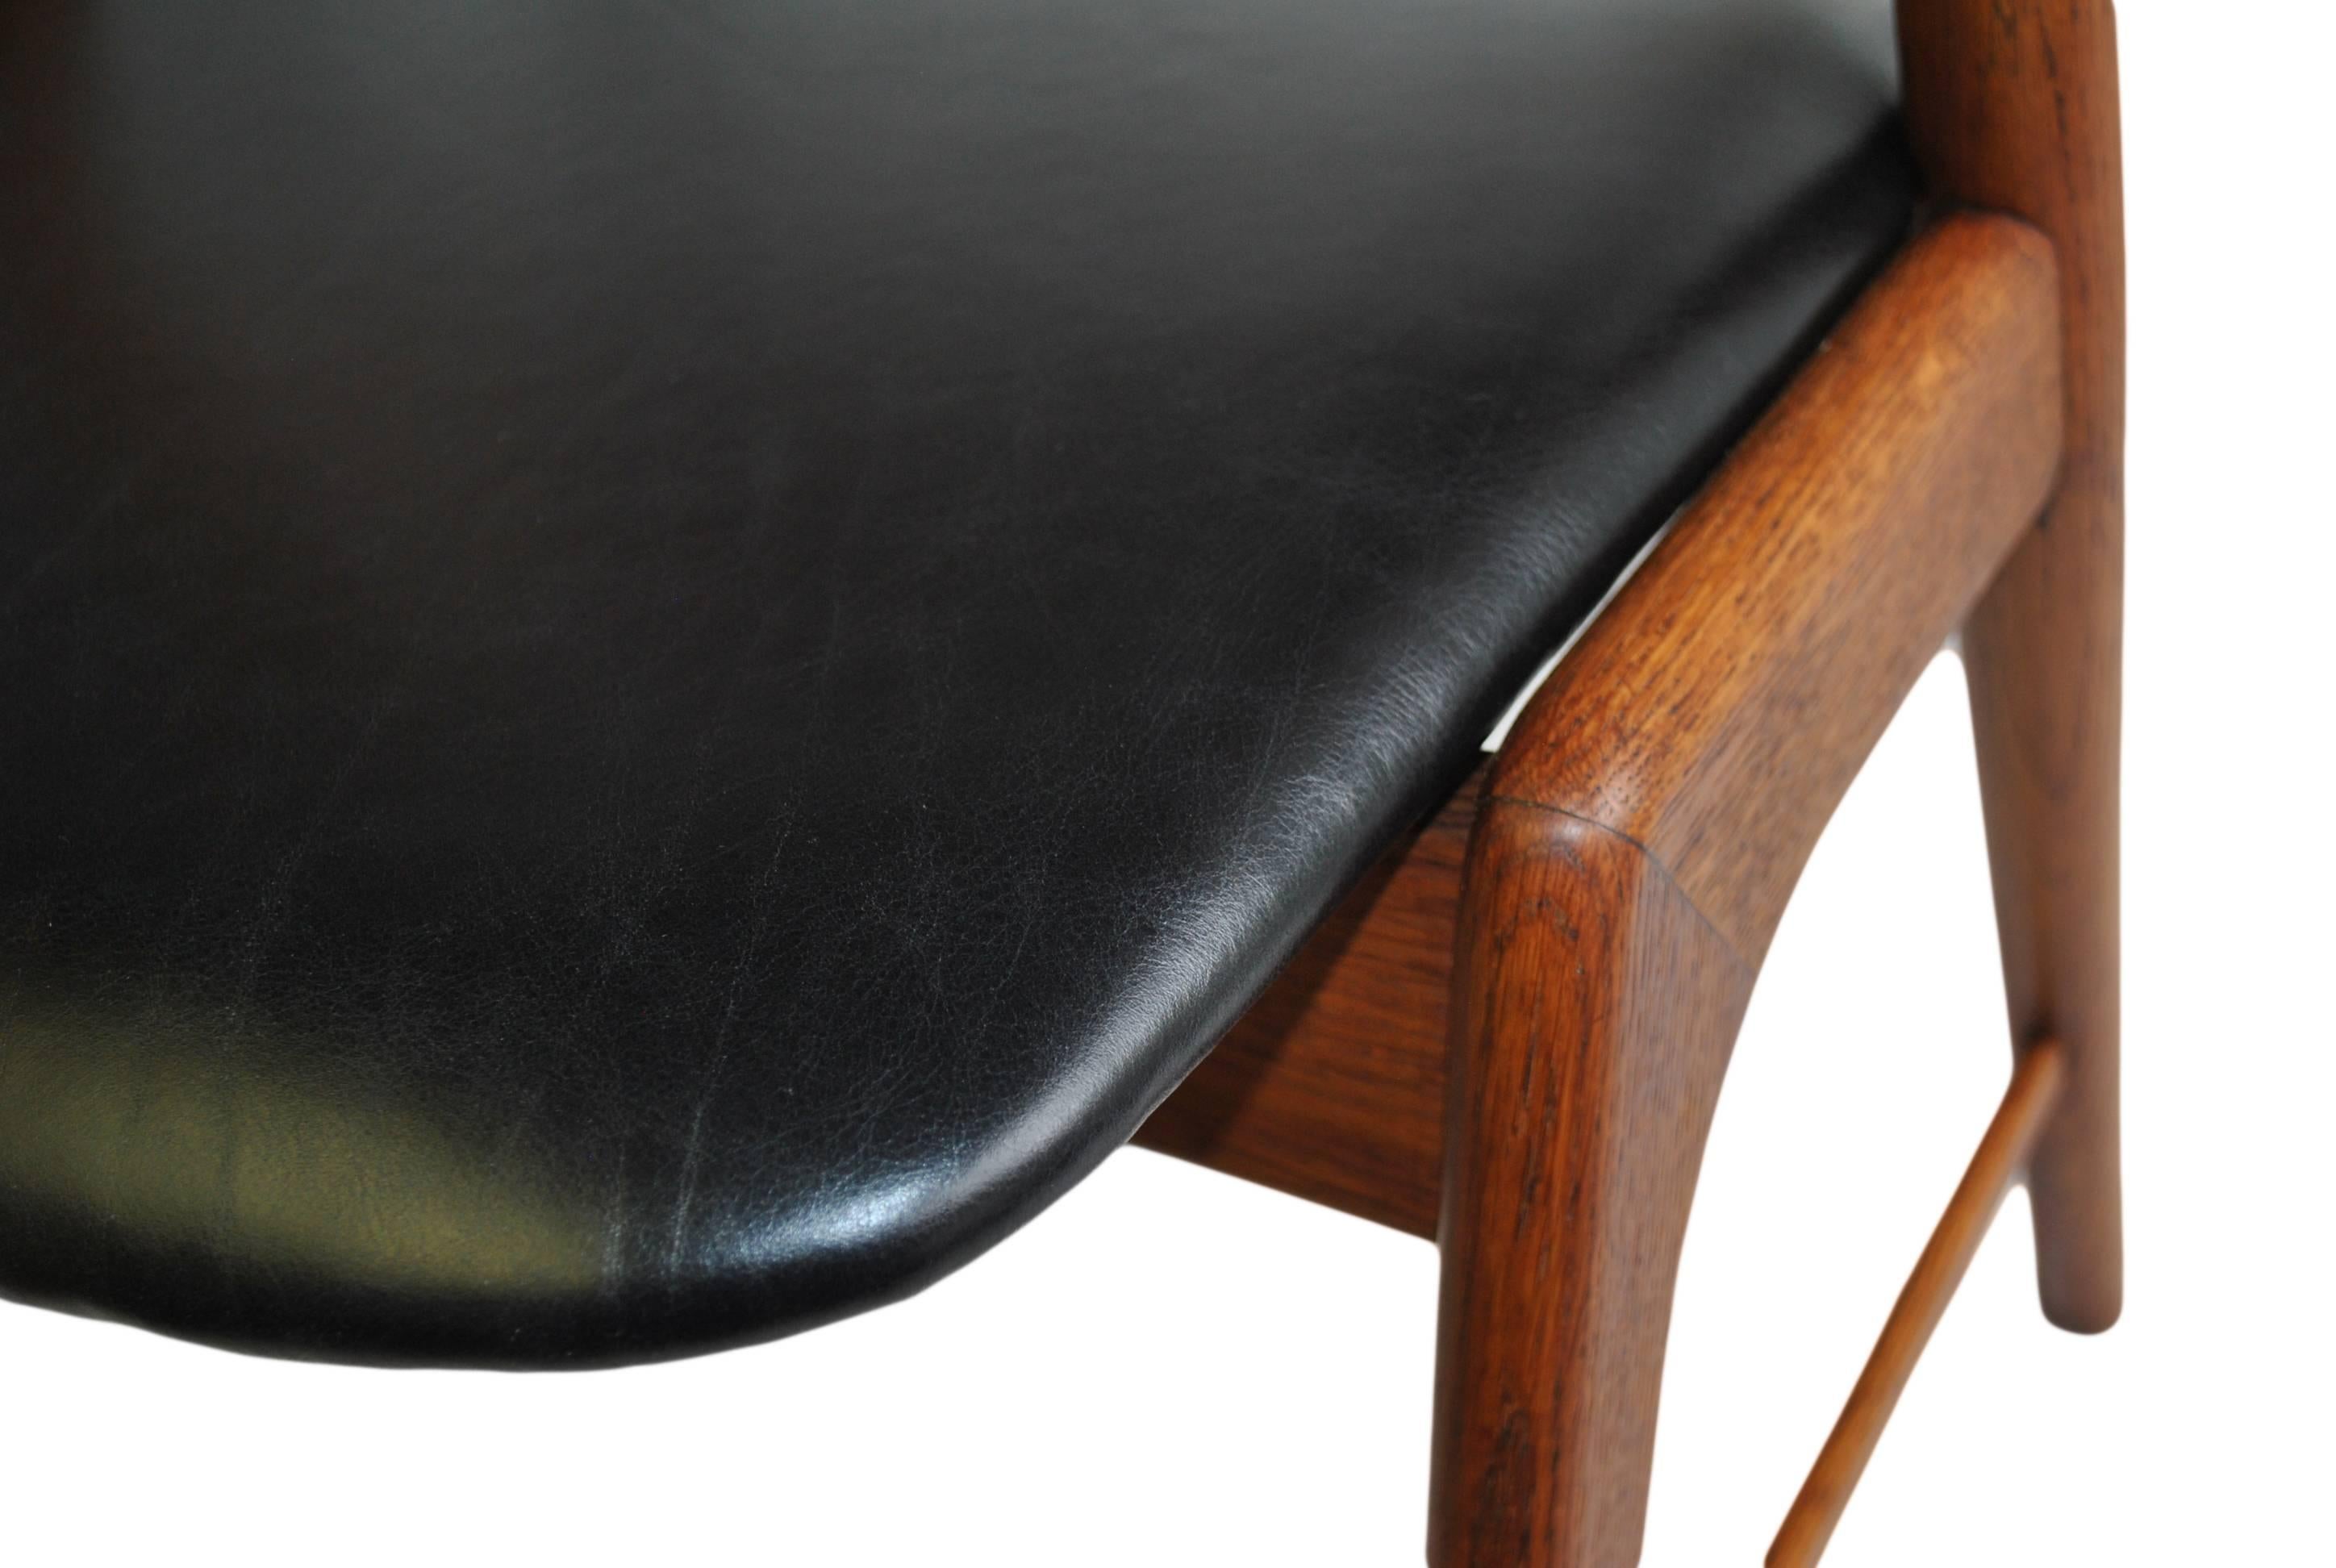 Pair of Kai Kristiansen Model 32 Chairs, repolished with New Leather. 1